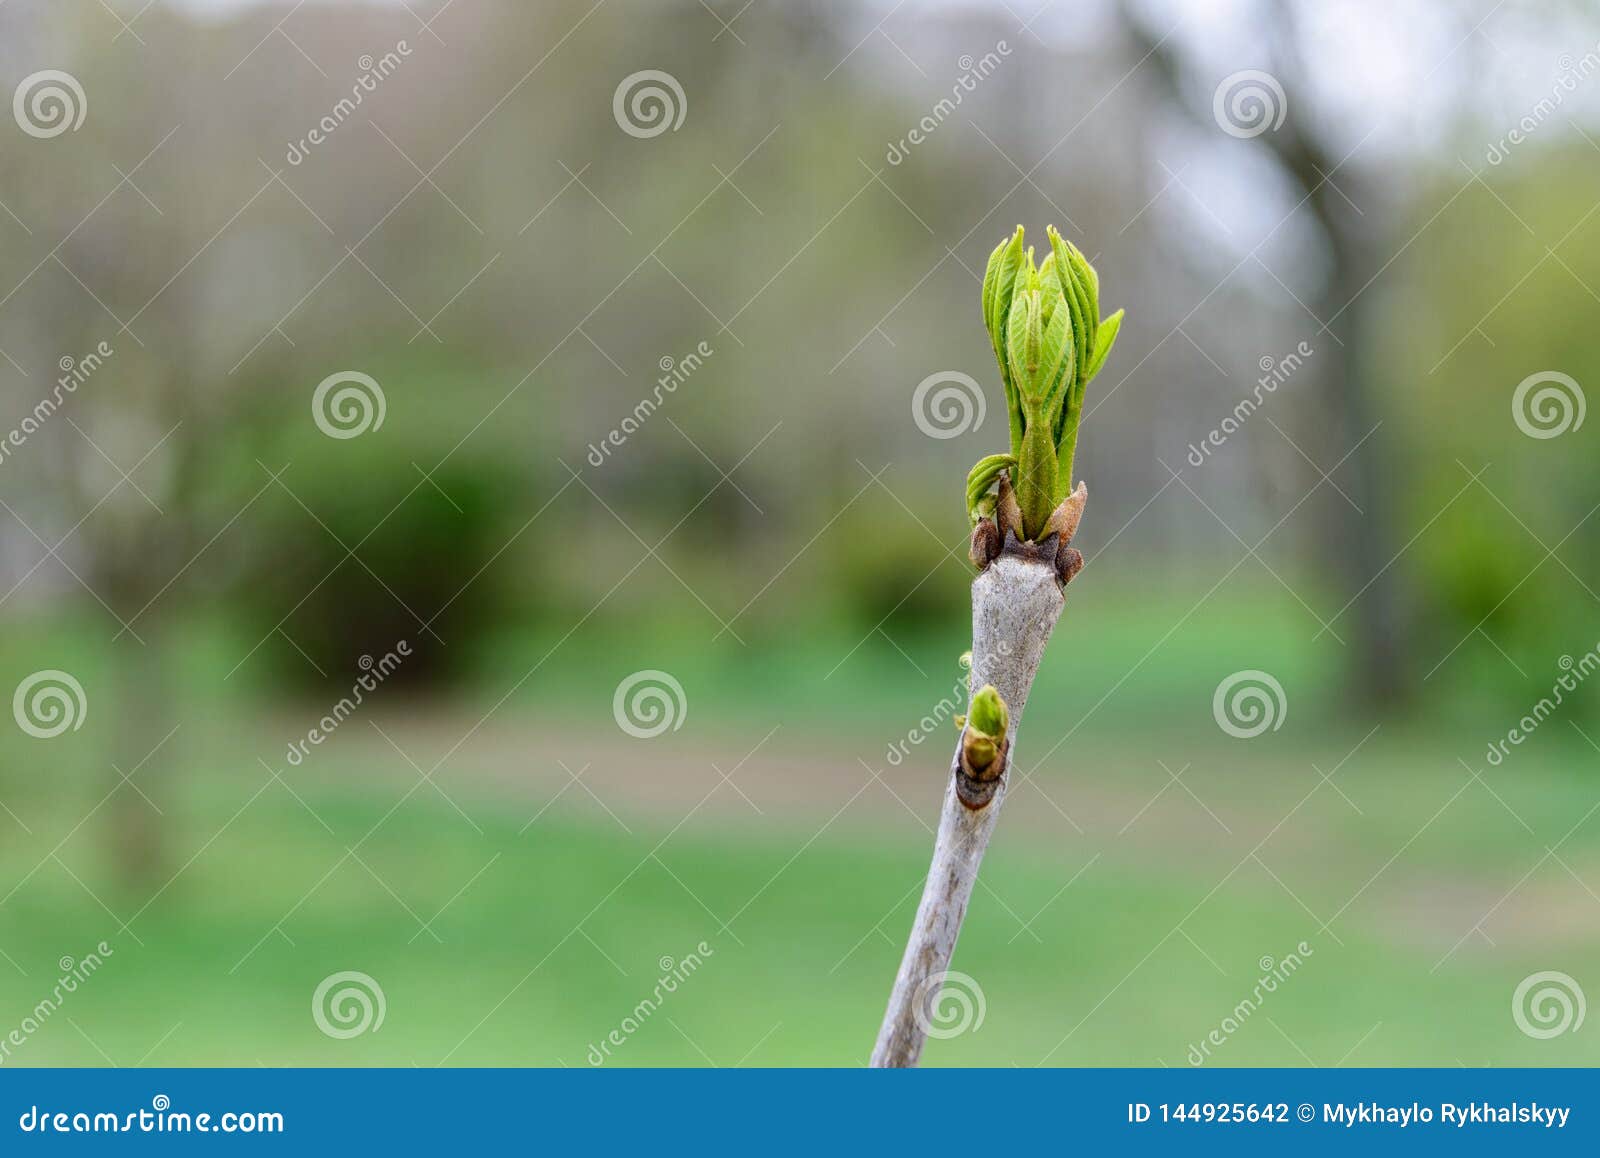 Spring Awakening of Nature. the First Shoots on the Branches. Young